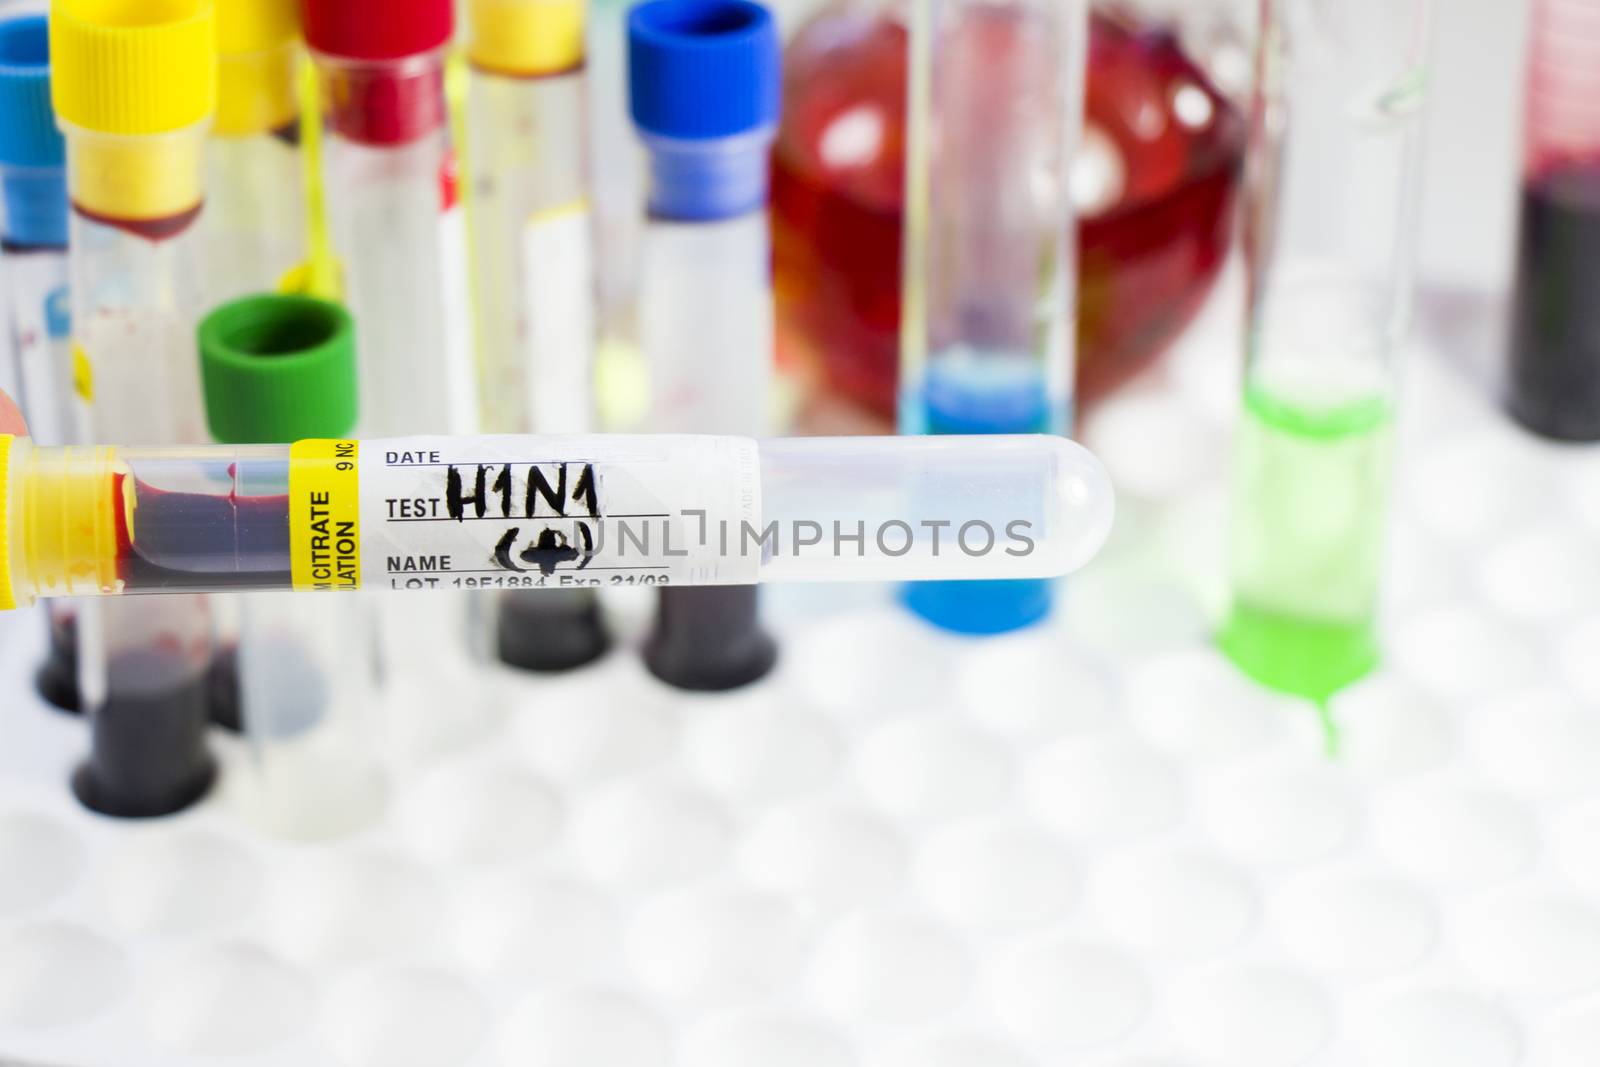 H1N1 swine influenza, diagnoses and lab tests, blood test tube samples, text and letter. Studio shoot on the white background.